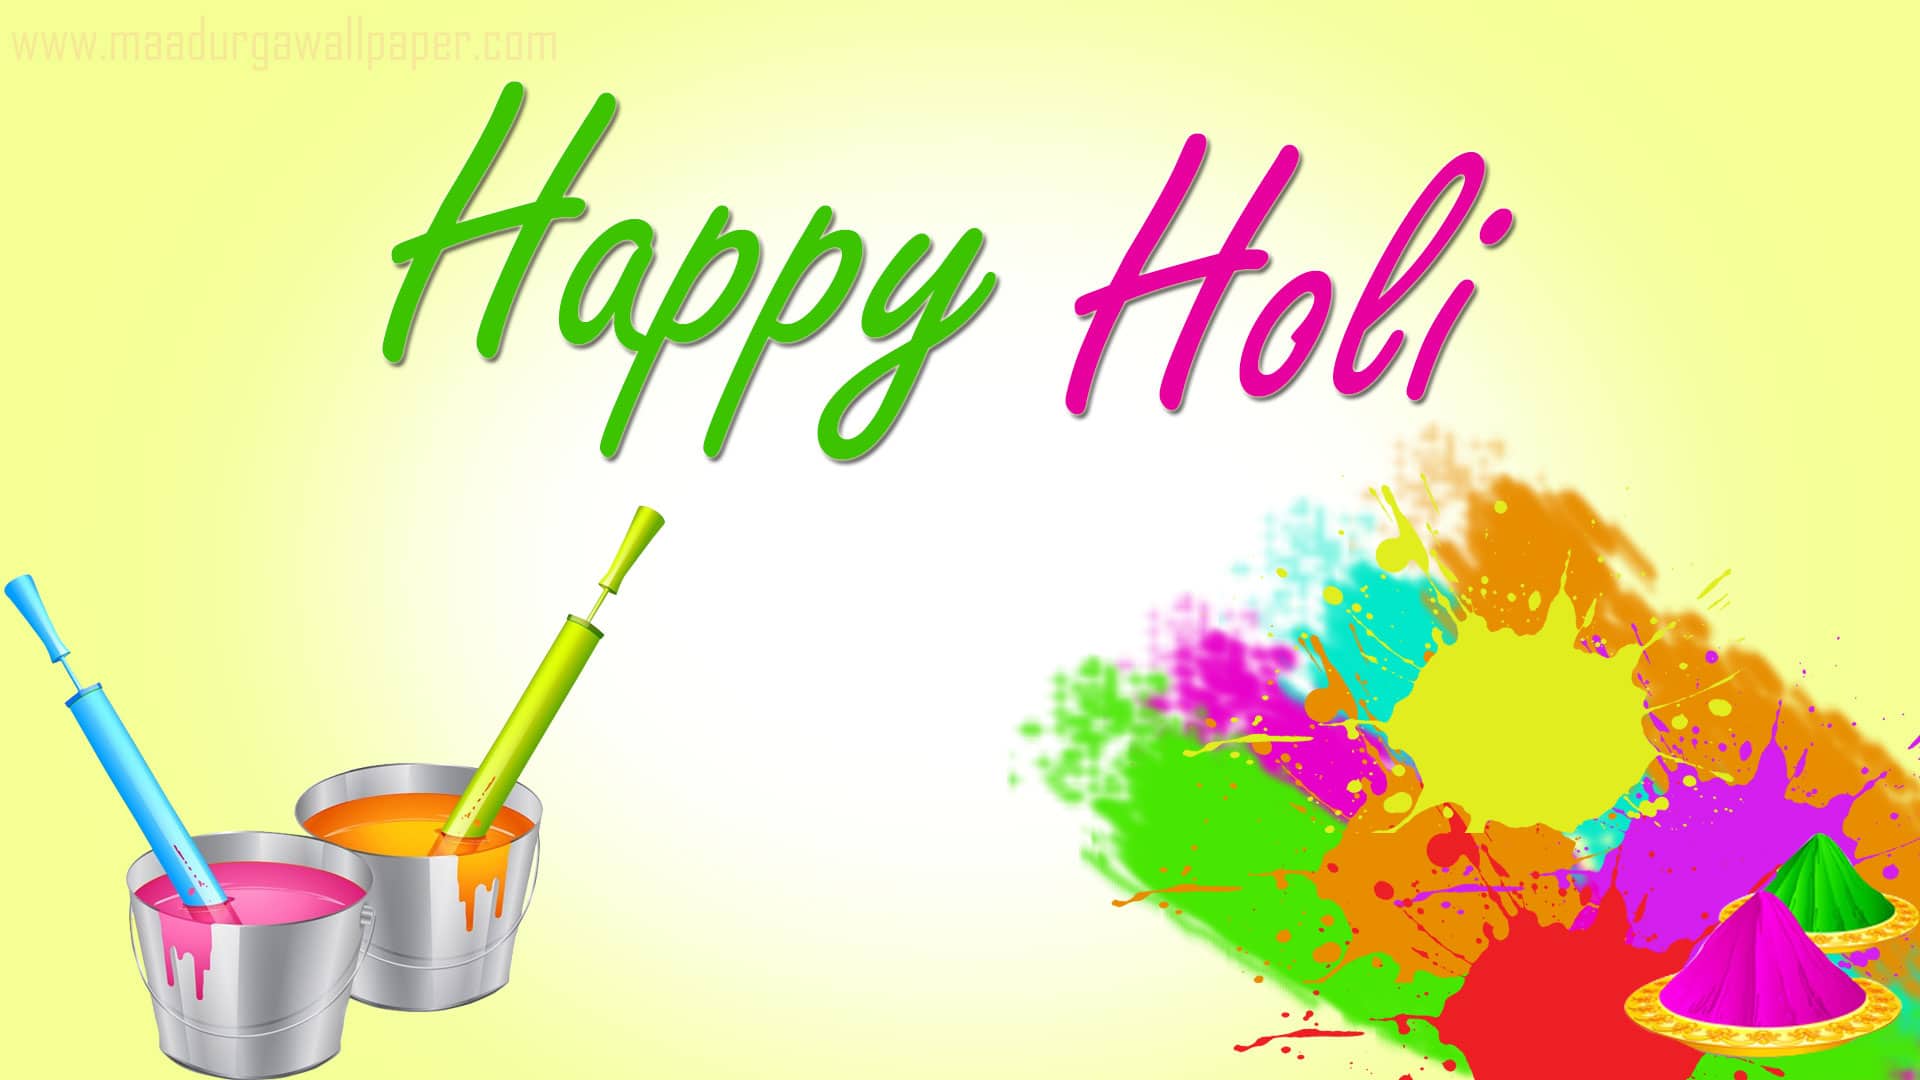 Happy Holi Image Wallpaper For Best Wishes